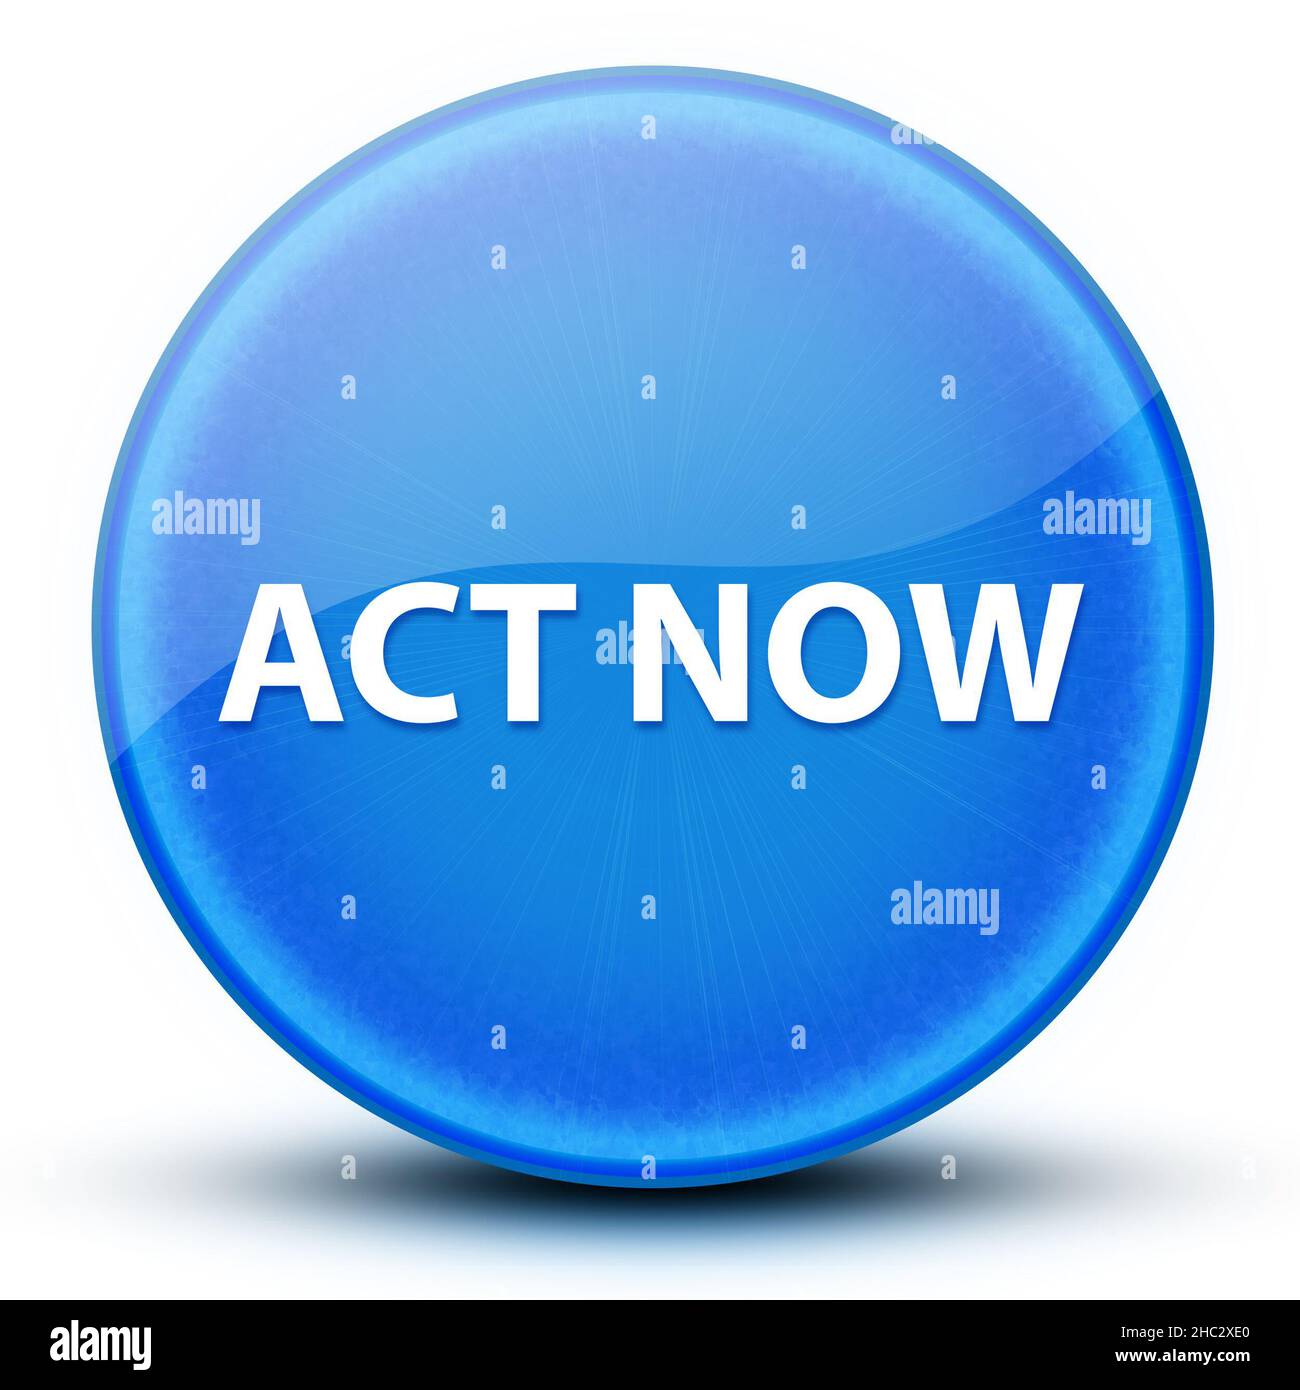 Act now eyeball glossy elegant blue round button abstract illustration Stock Photo